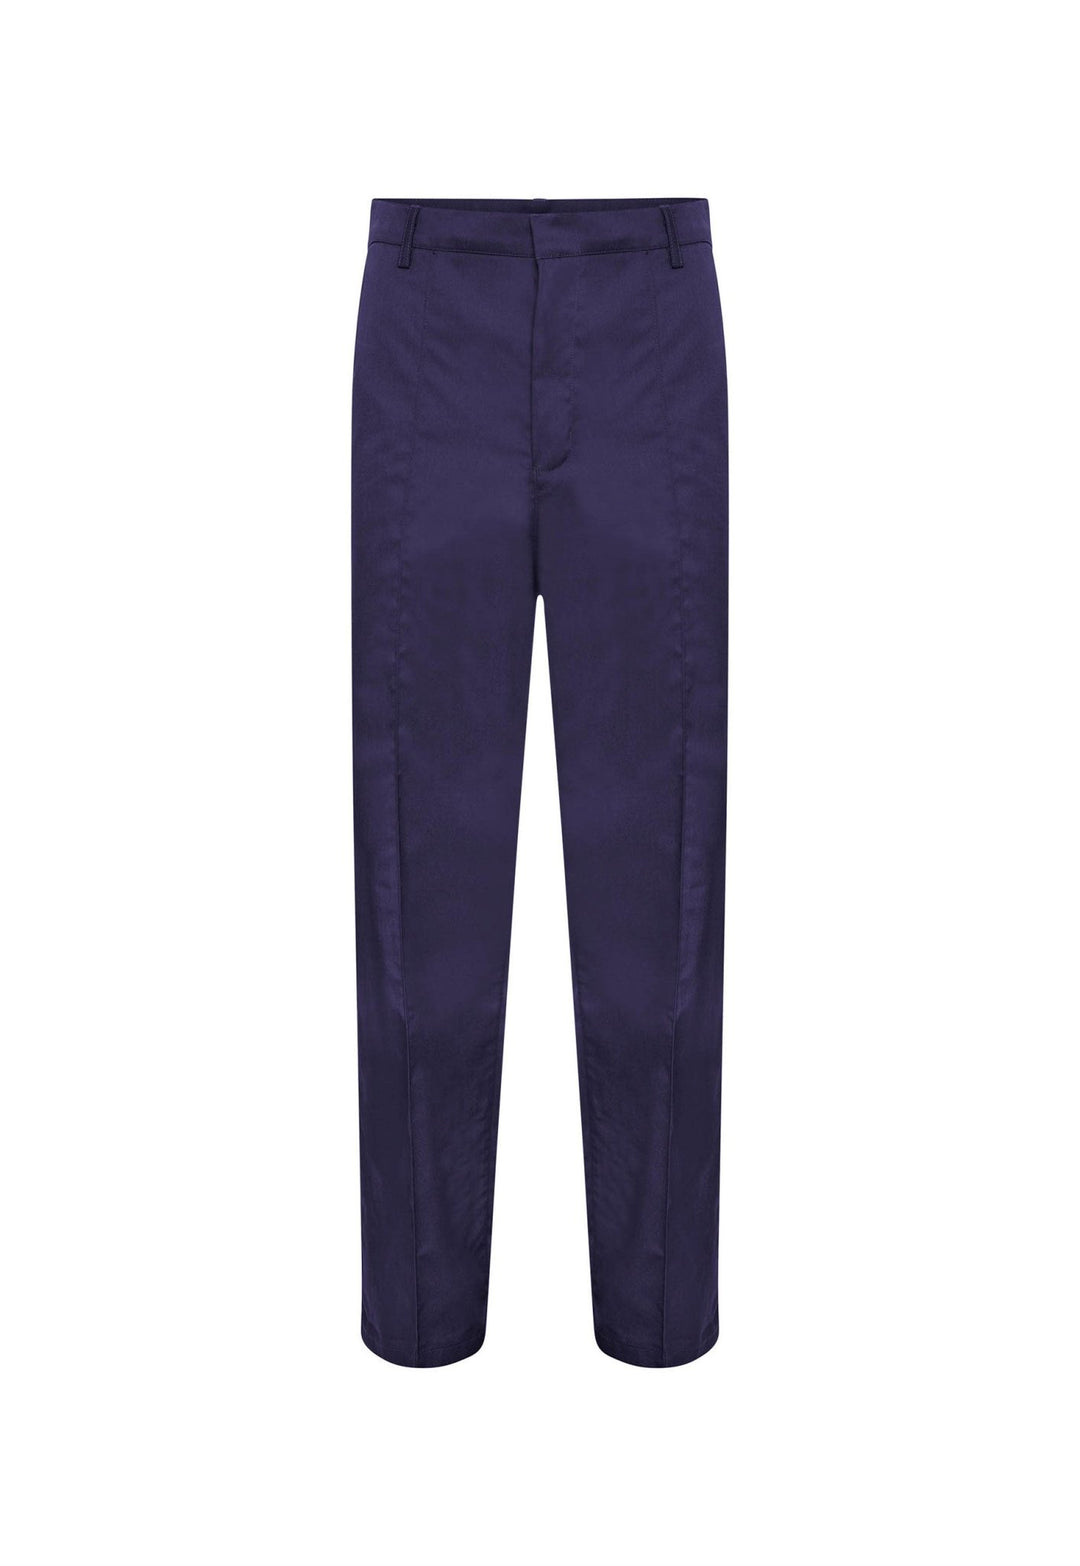 NMPCTP - Men's Pleated Trousers - The Work Uniform Company